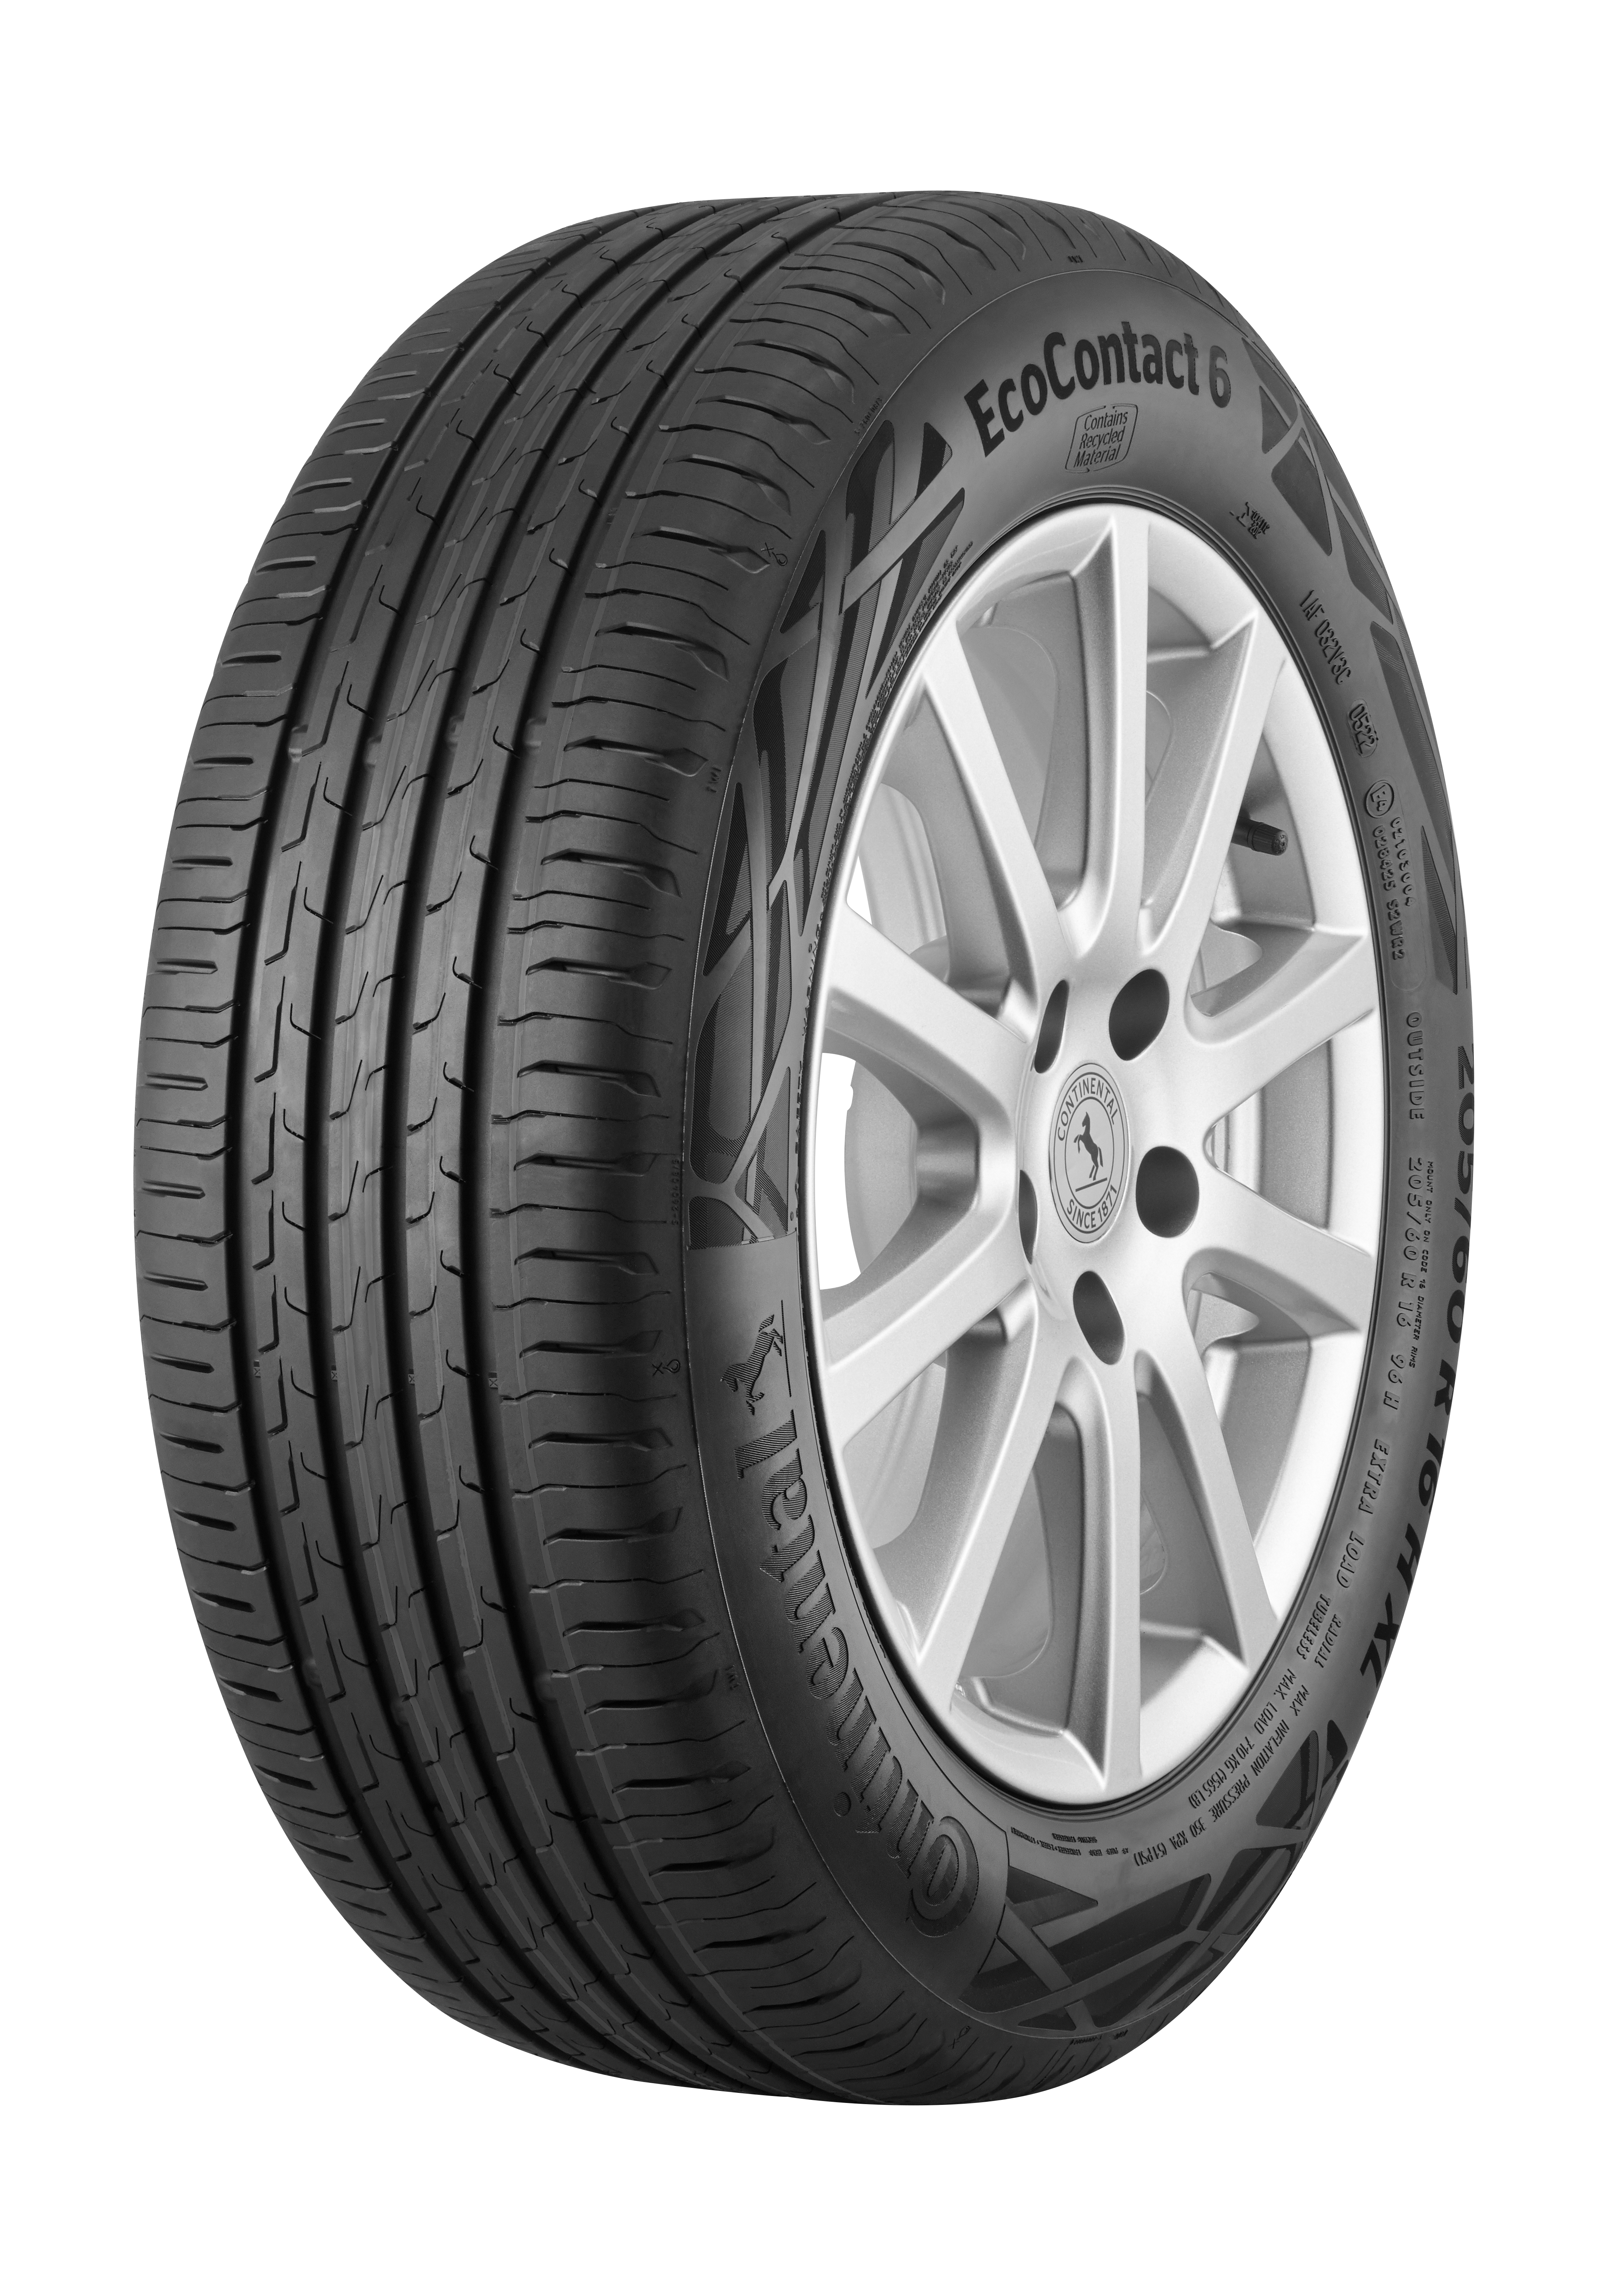 Continental Launches First Tires with PET Carbon Polyester Renewable - News from Bottles Made Recycled